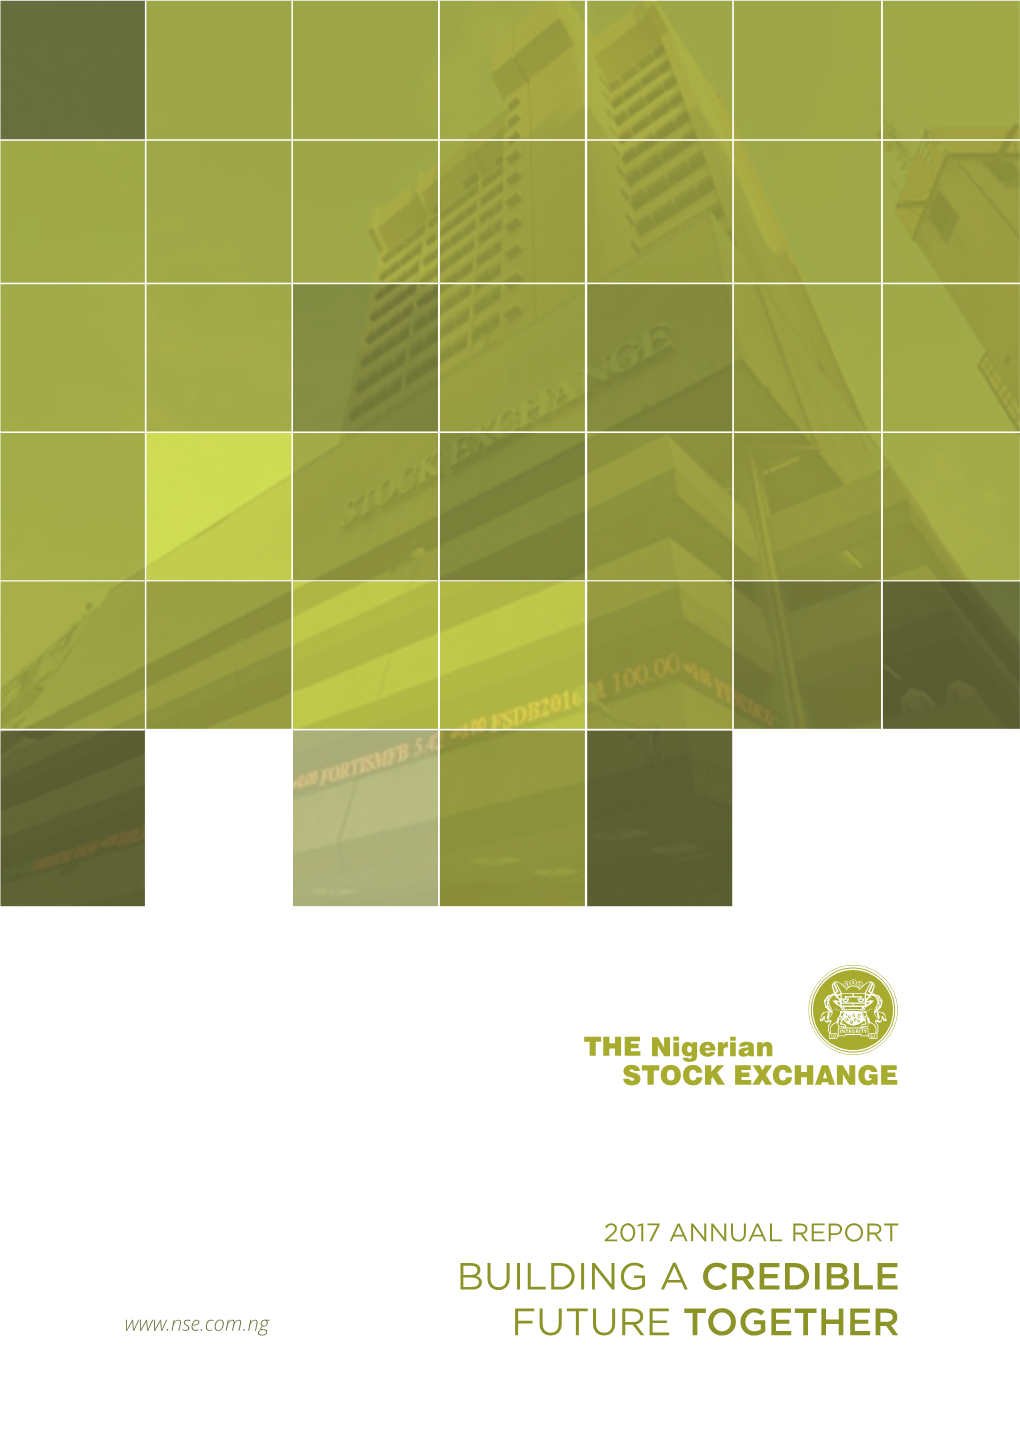 The Nigerian Stock Exchange 2017 Annual Report